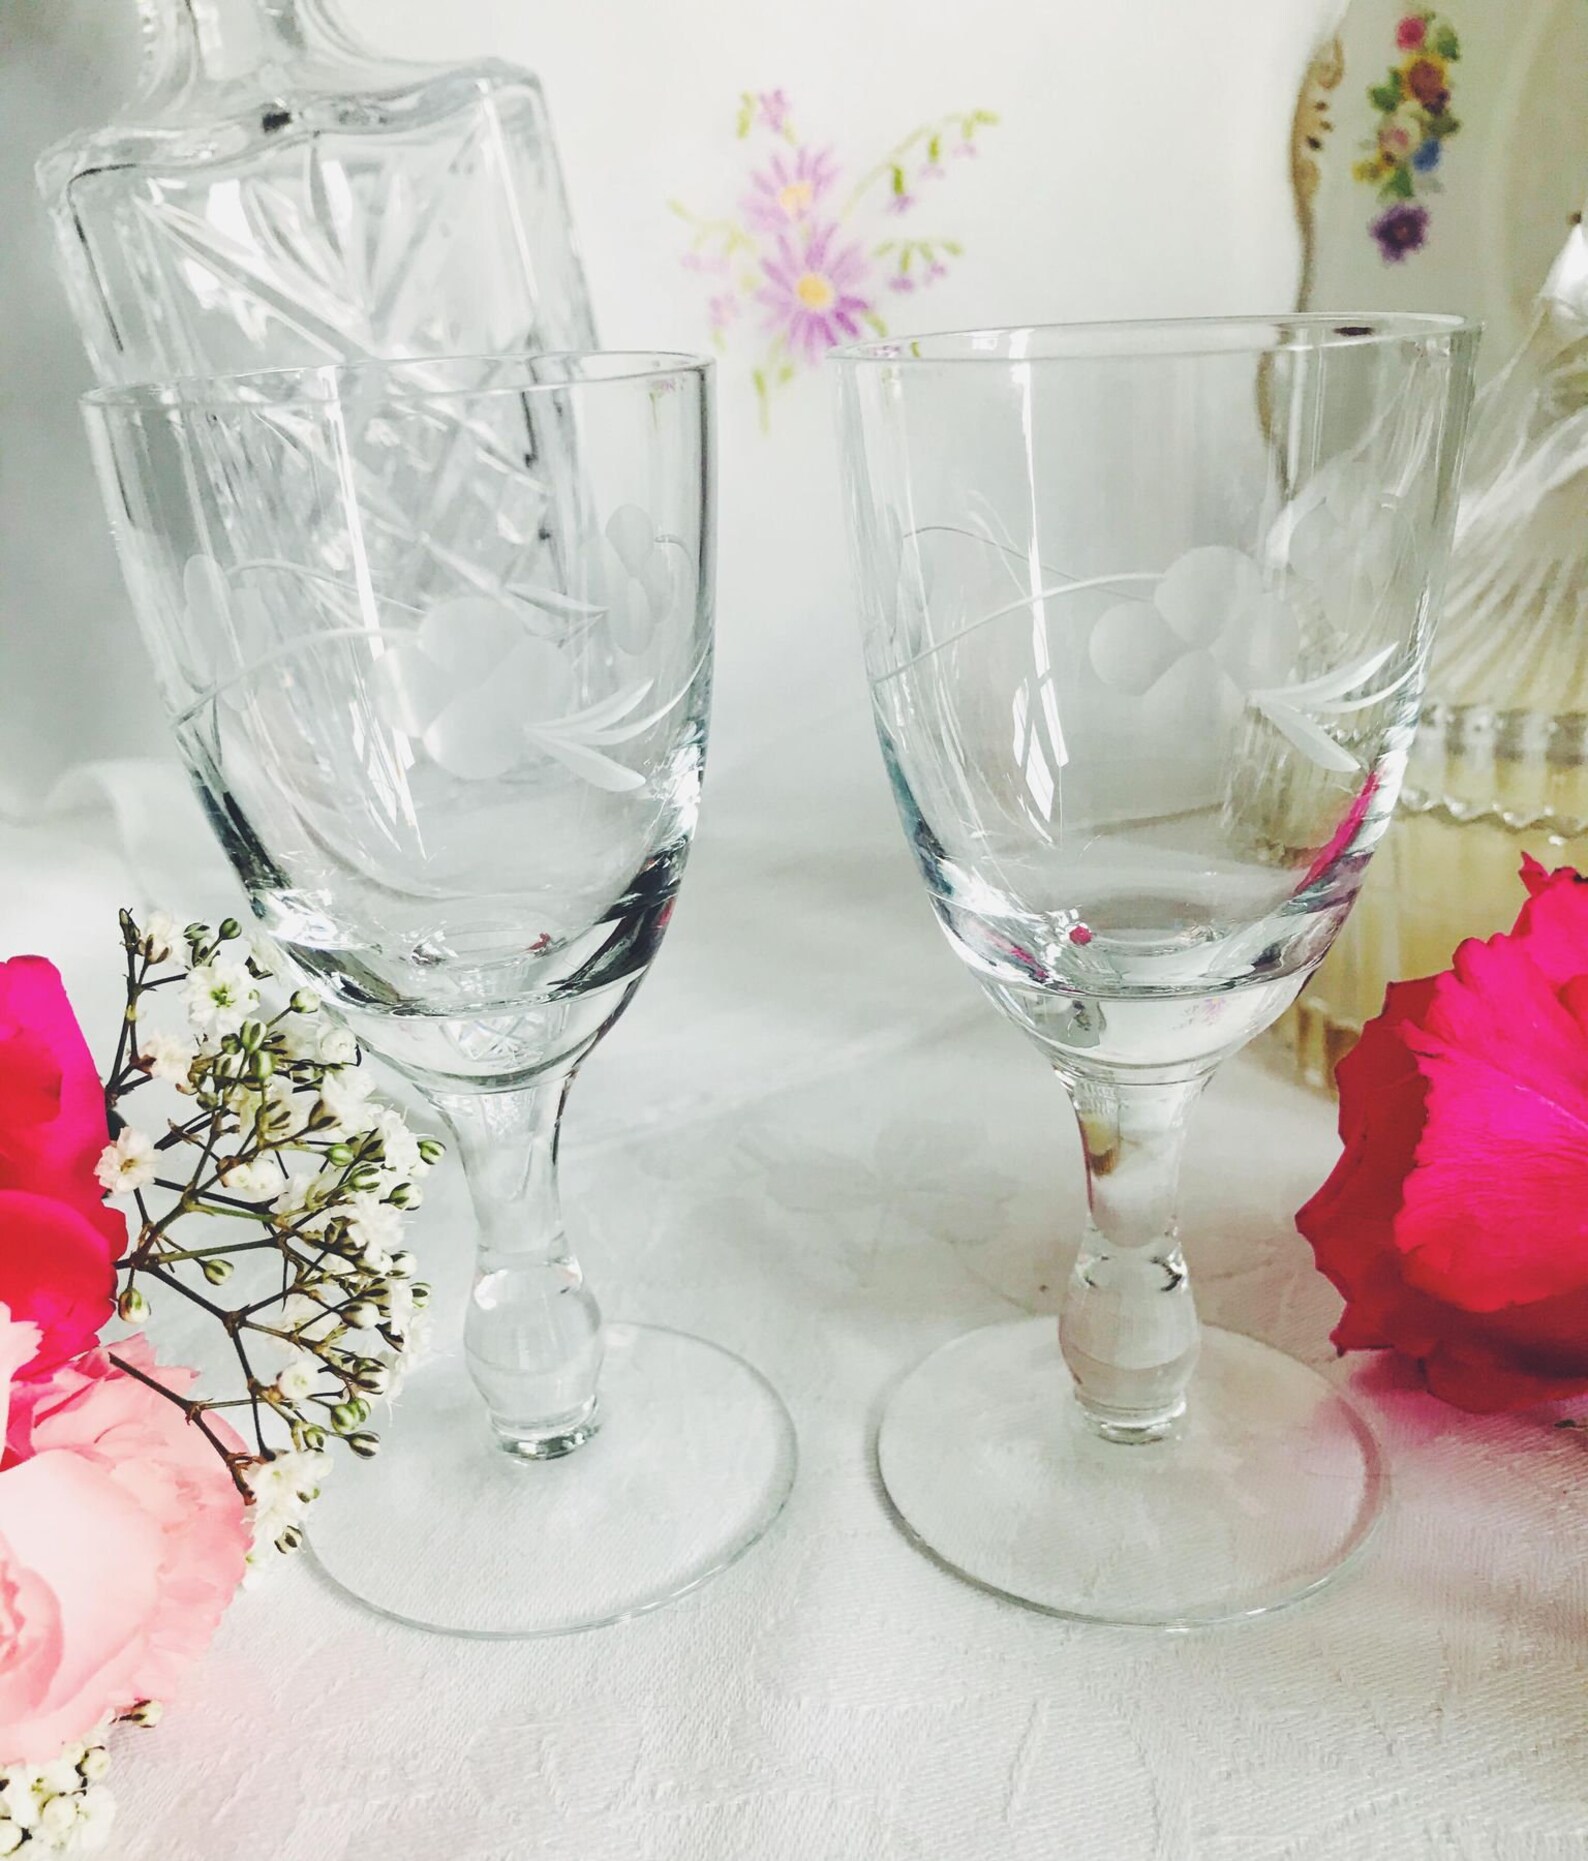 Pair of Vintage Etched Floral Sherry Glasses | Etsy